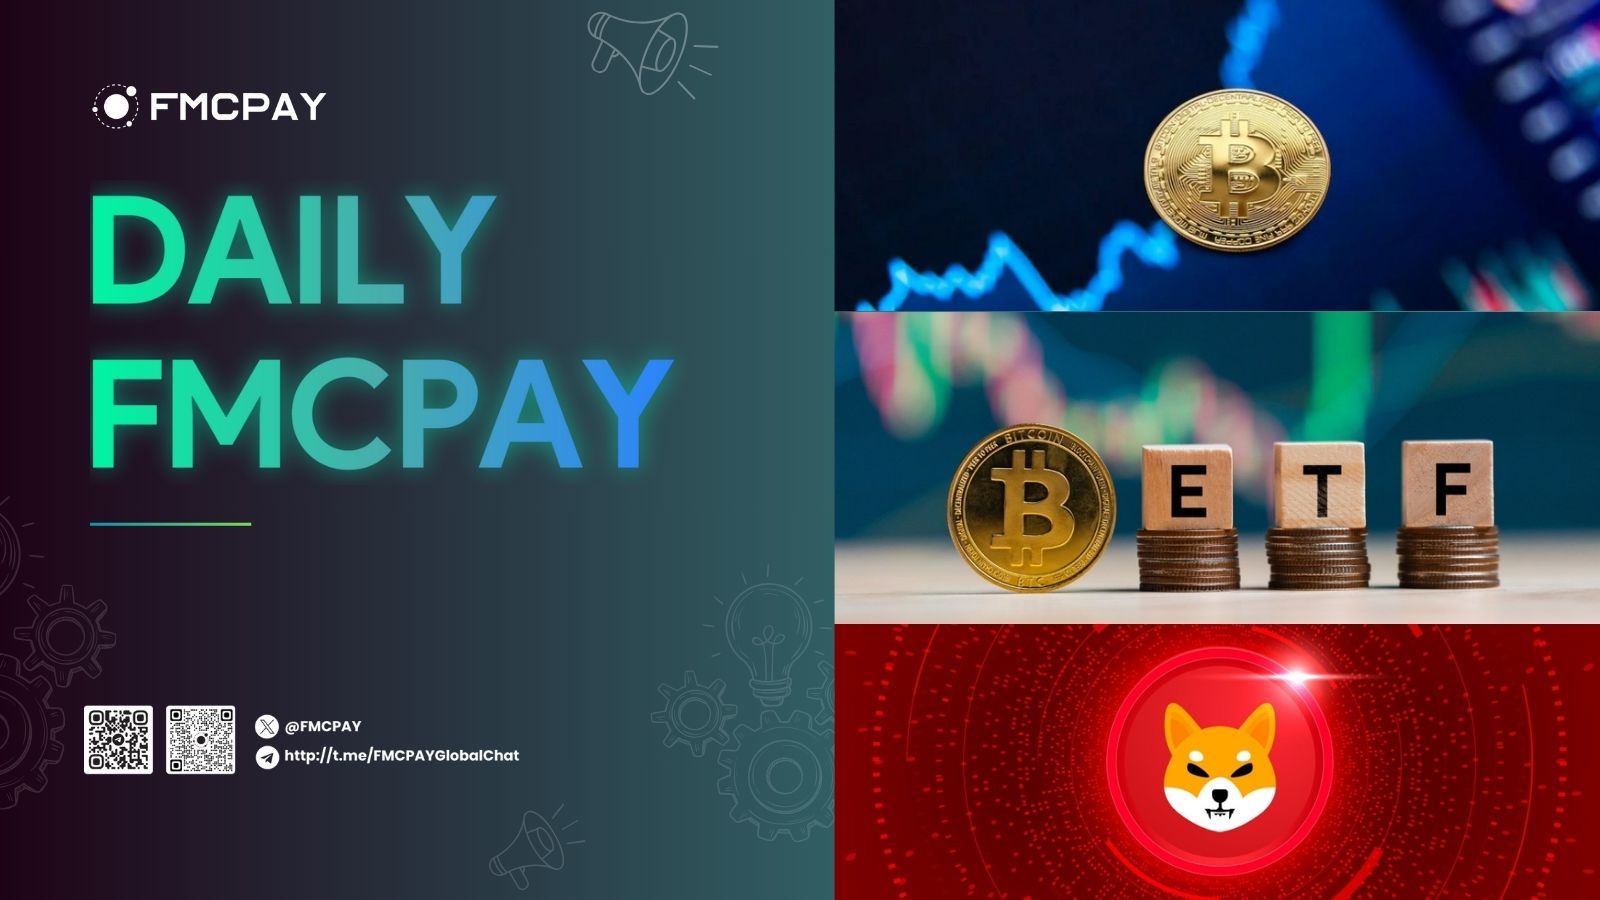 fmcpay government selling bitcoin is nothing but plain fud herere why